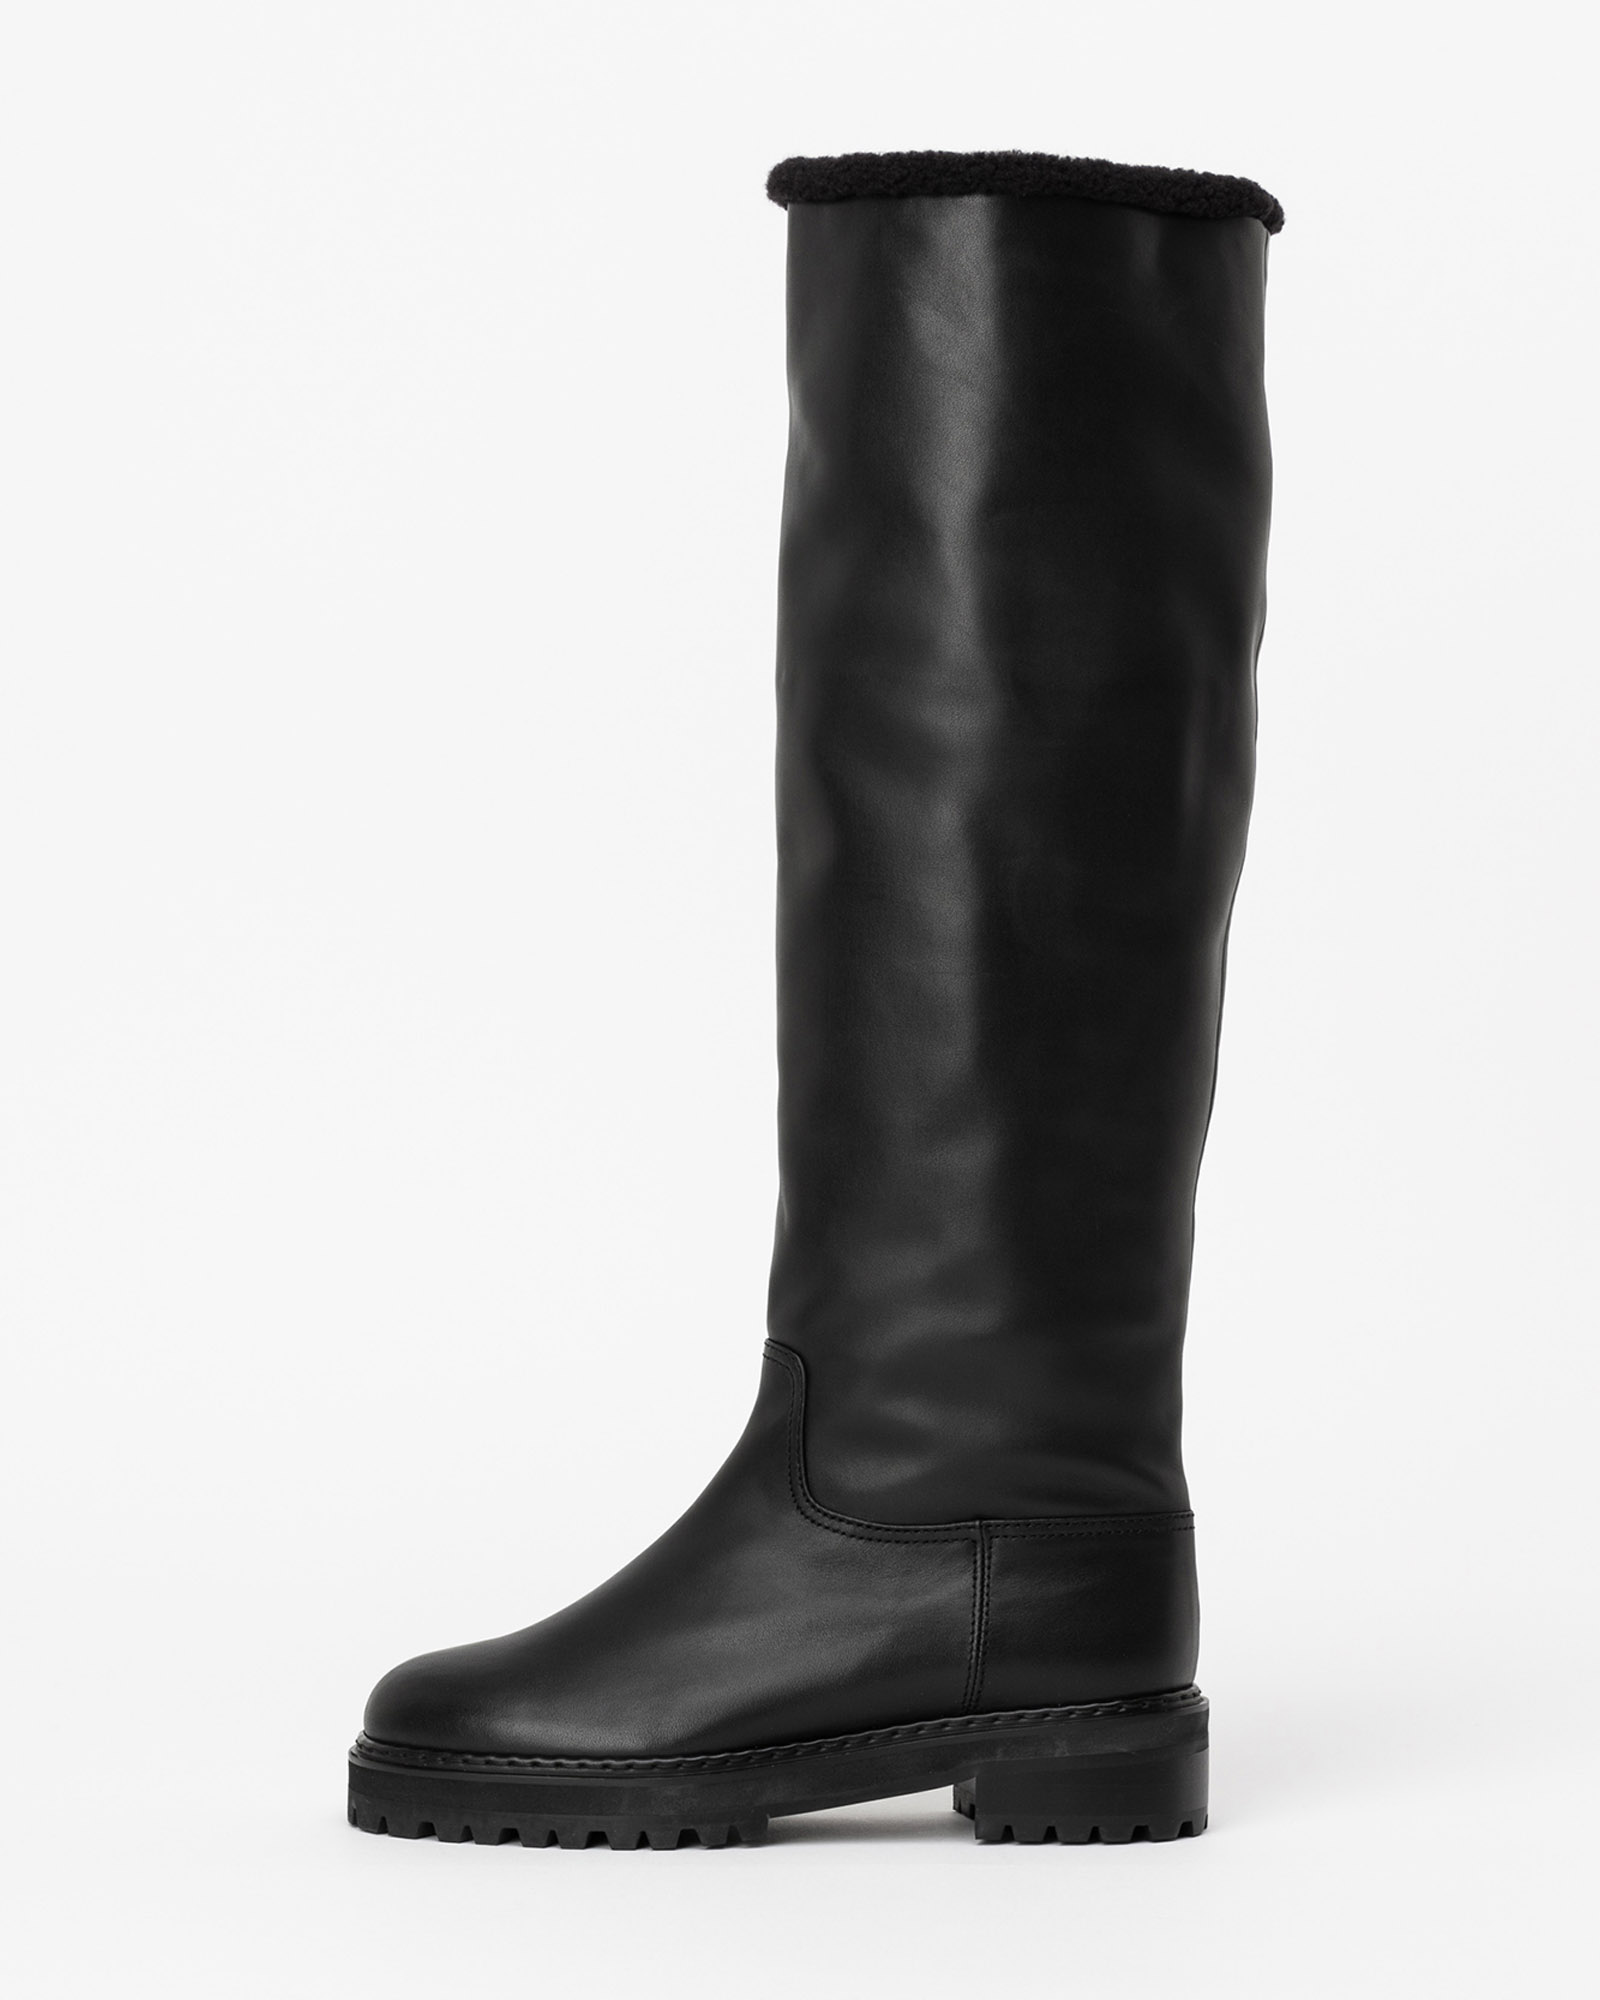 Klee Shearling Over the Knee Boots in Regular Black